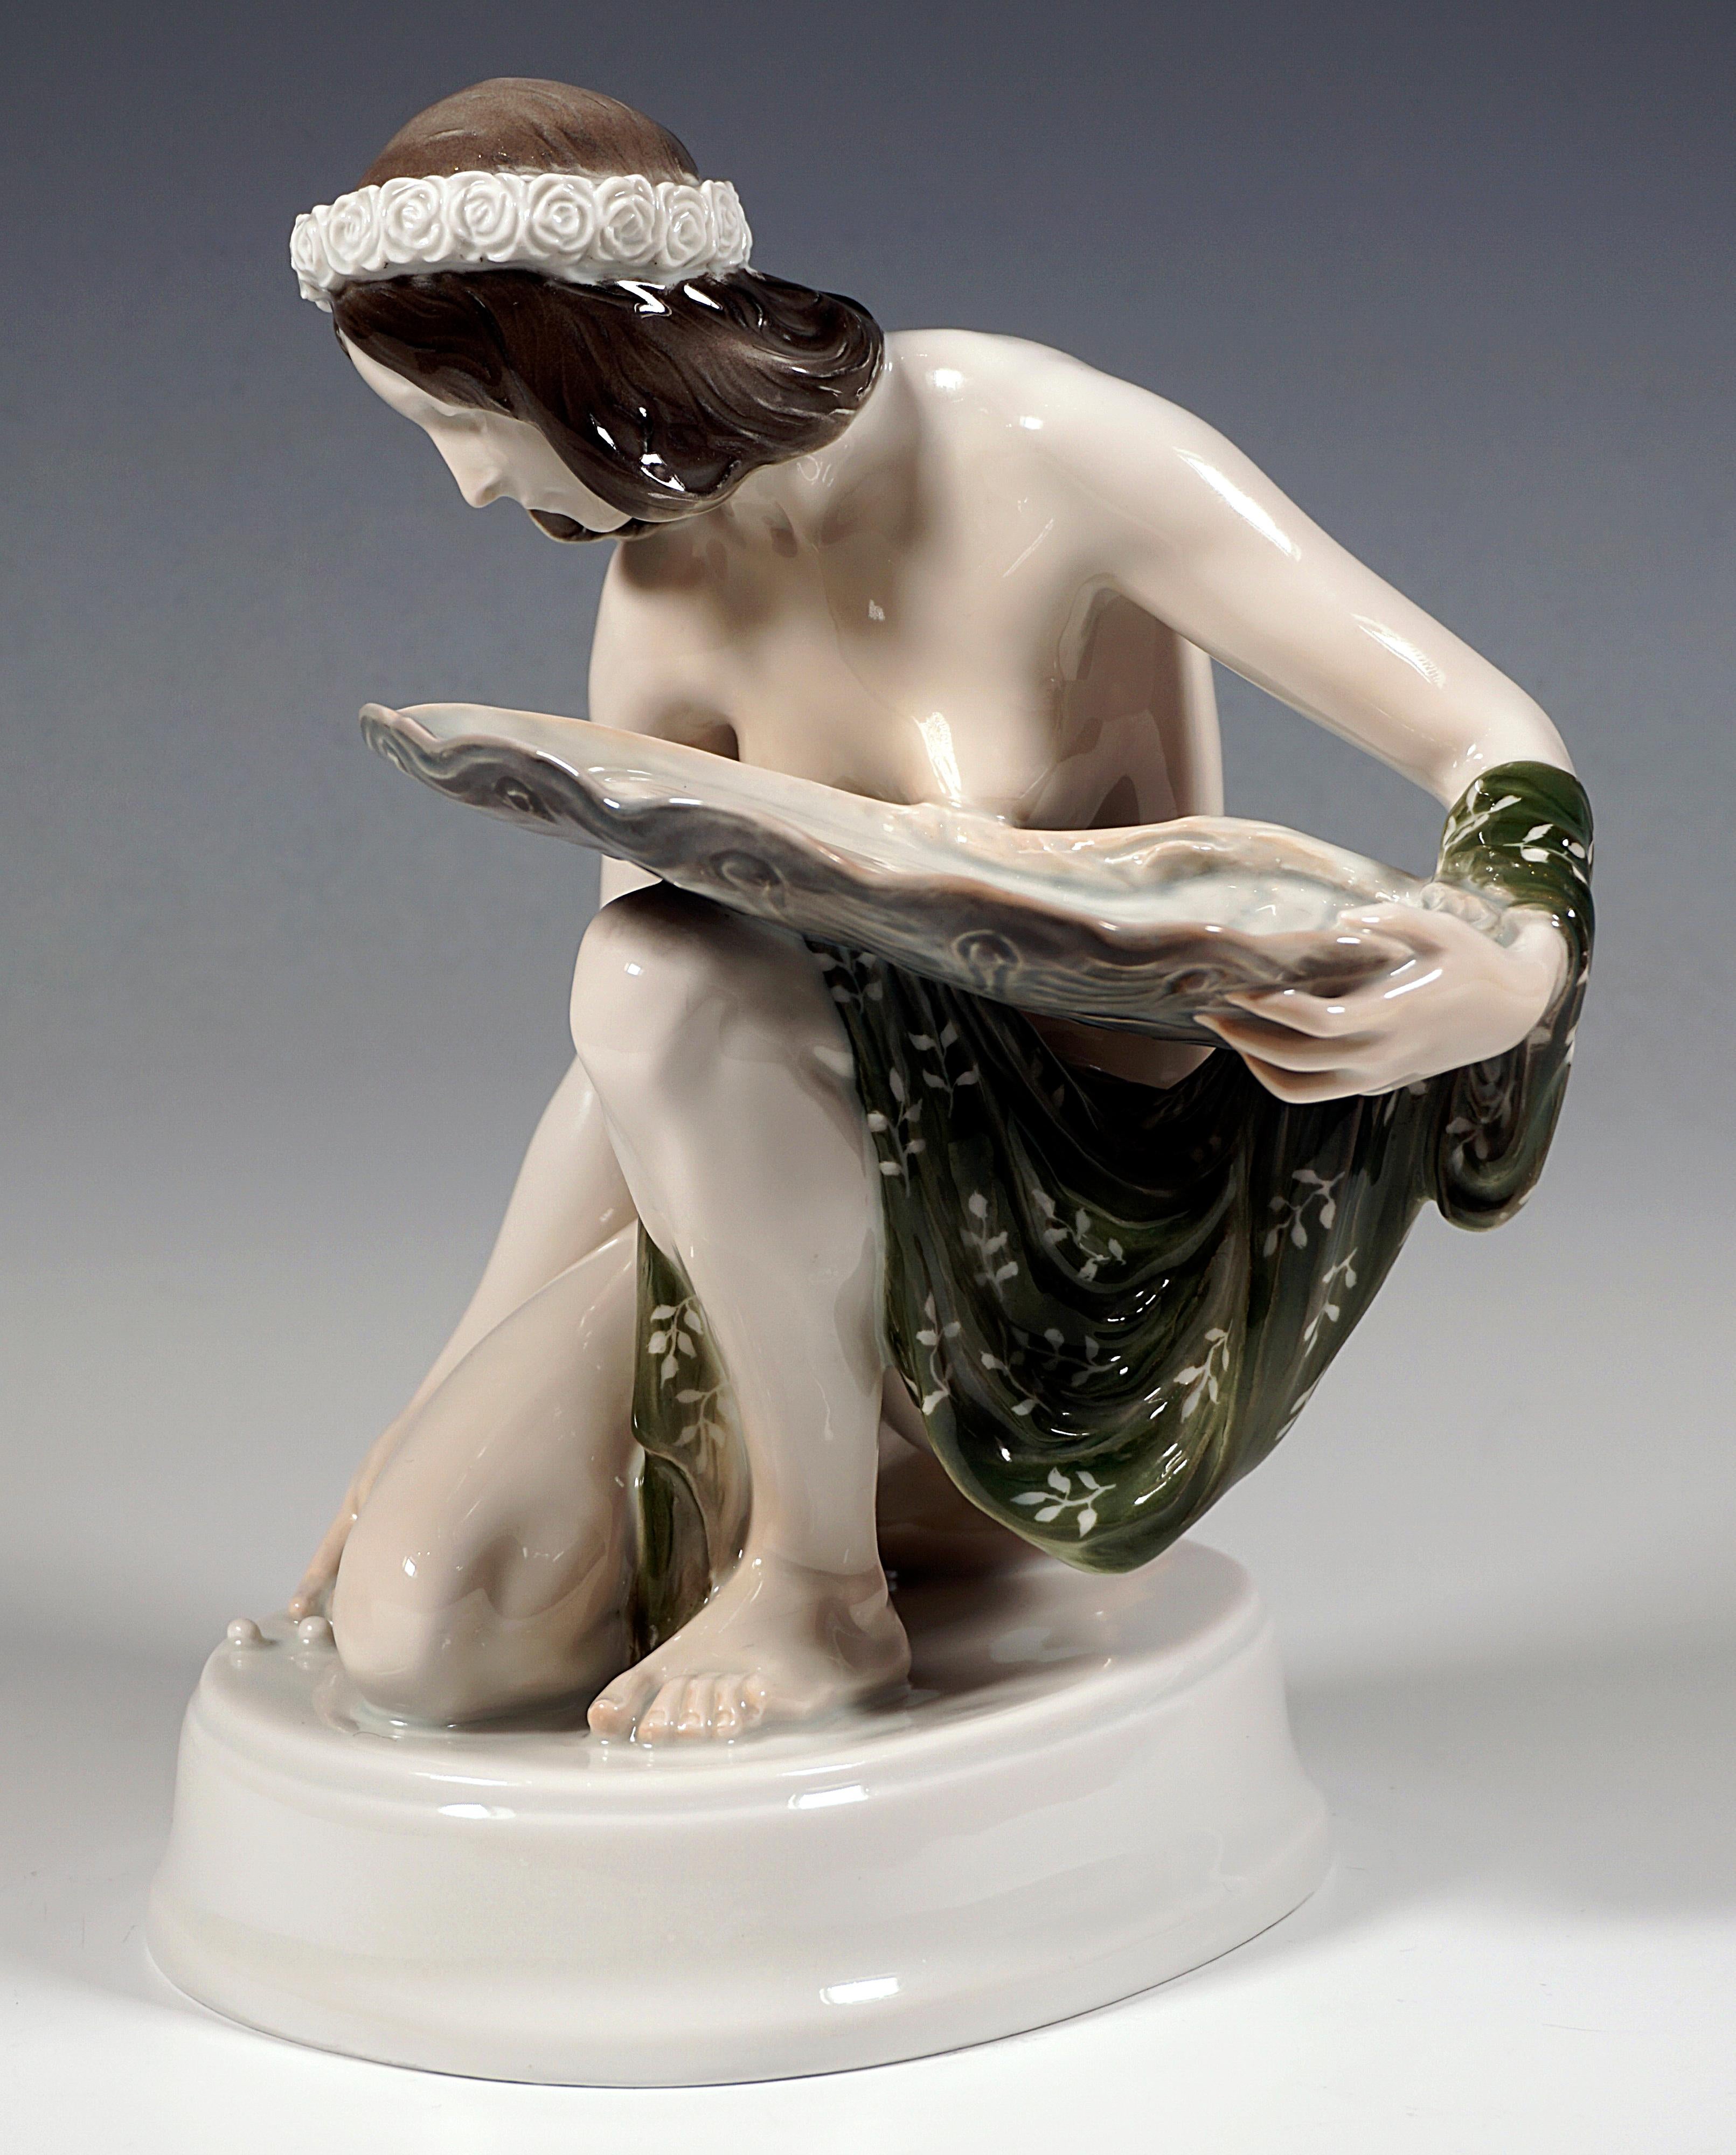 Hand-Crafted  Porcelain Figurine 'Pearl Seeker' K. Himmelstoss, Rosenthal Selb Germany, 1920